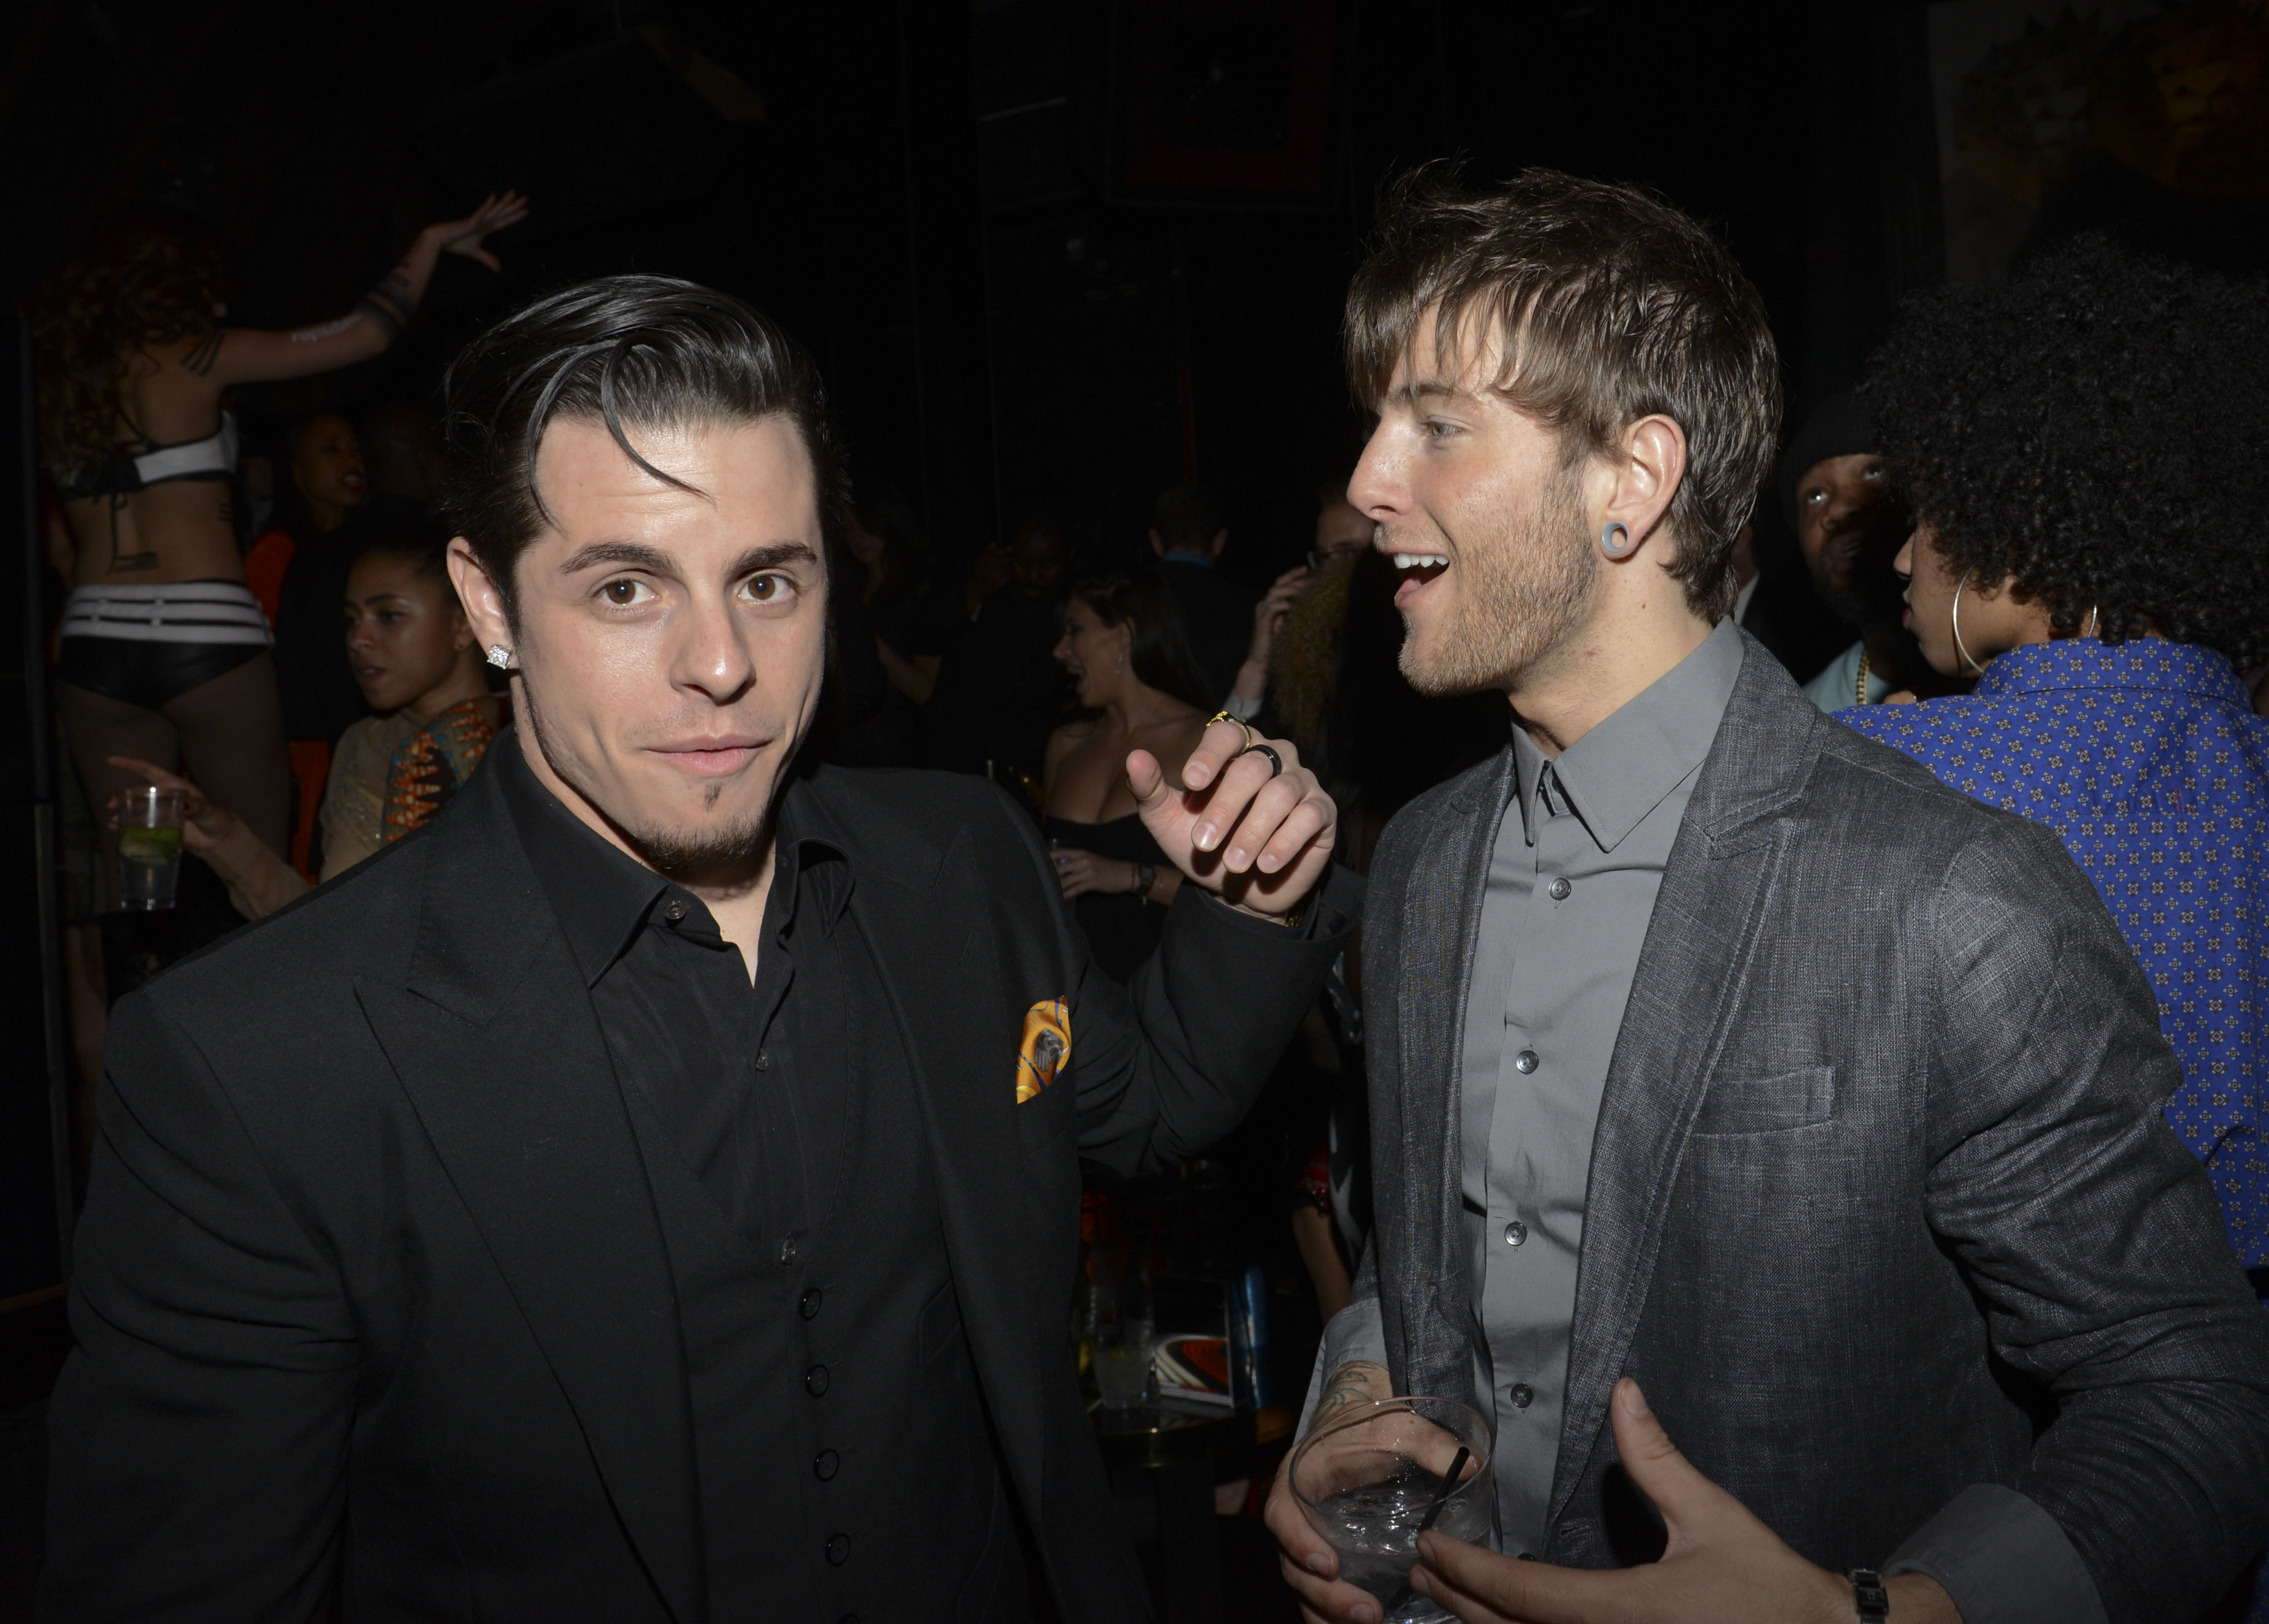 Choreographer Beau Casper Smart and Drew Chadwick attend Republic Records GRAMMY Party on January 26, 2014 in Los Angeles, California.  (Photo by Michael Bezjian/WireImage)